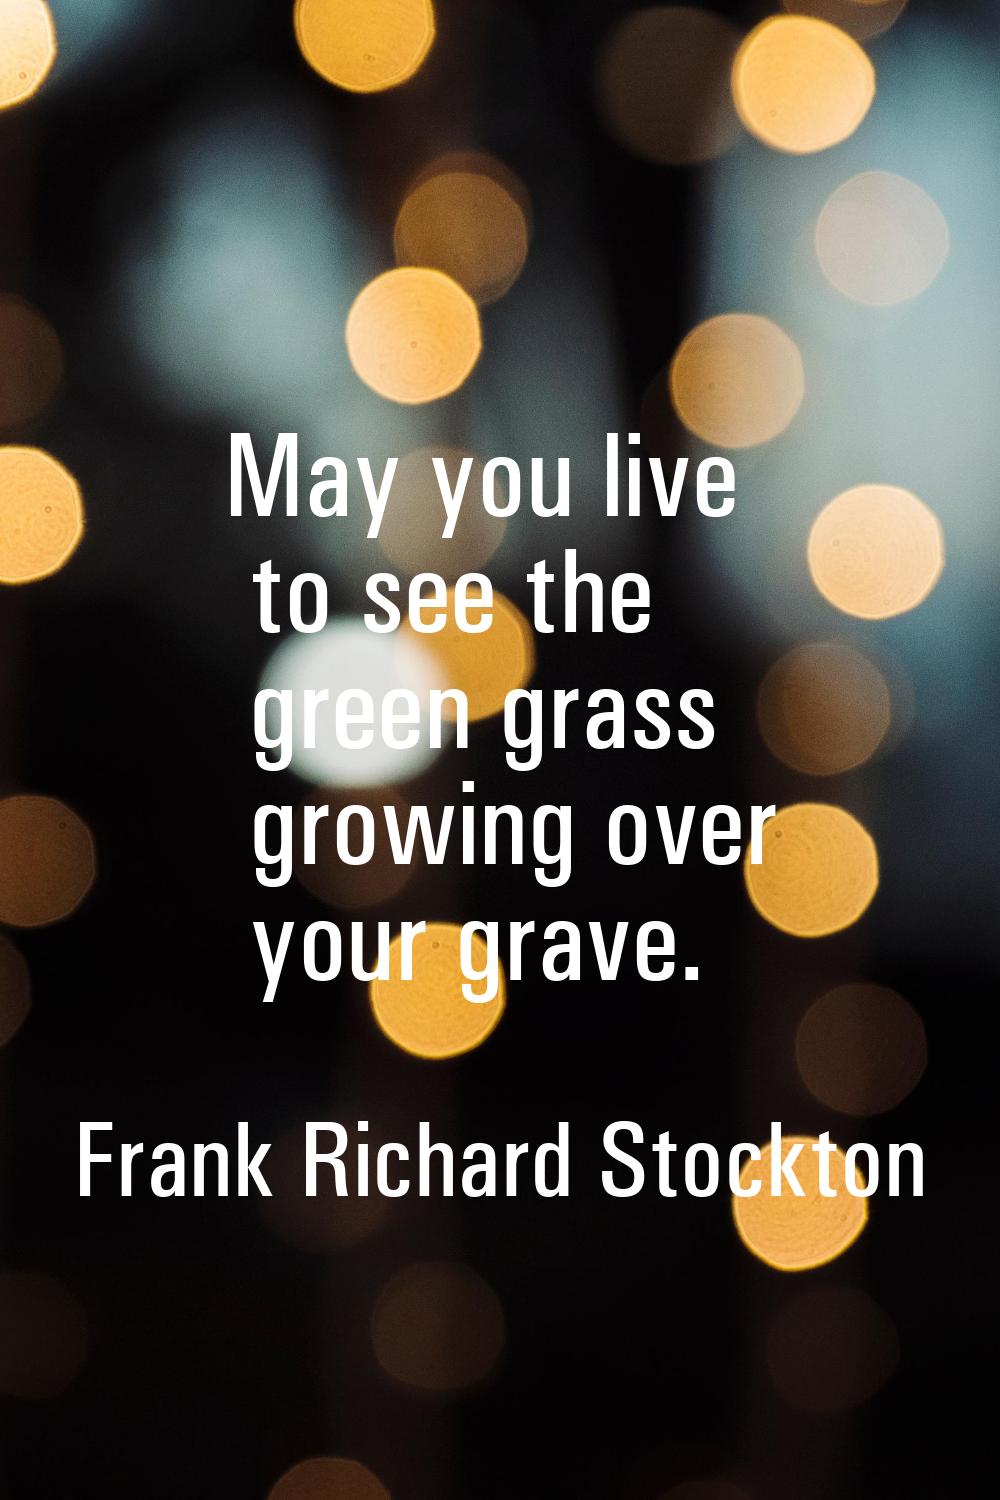 May you live to see the green grass growing over your grave.